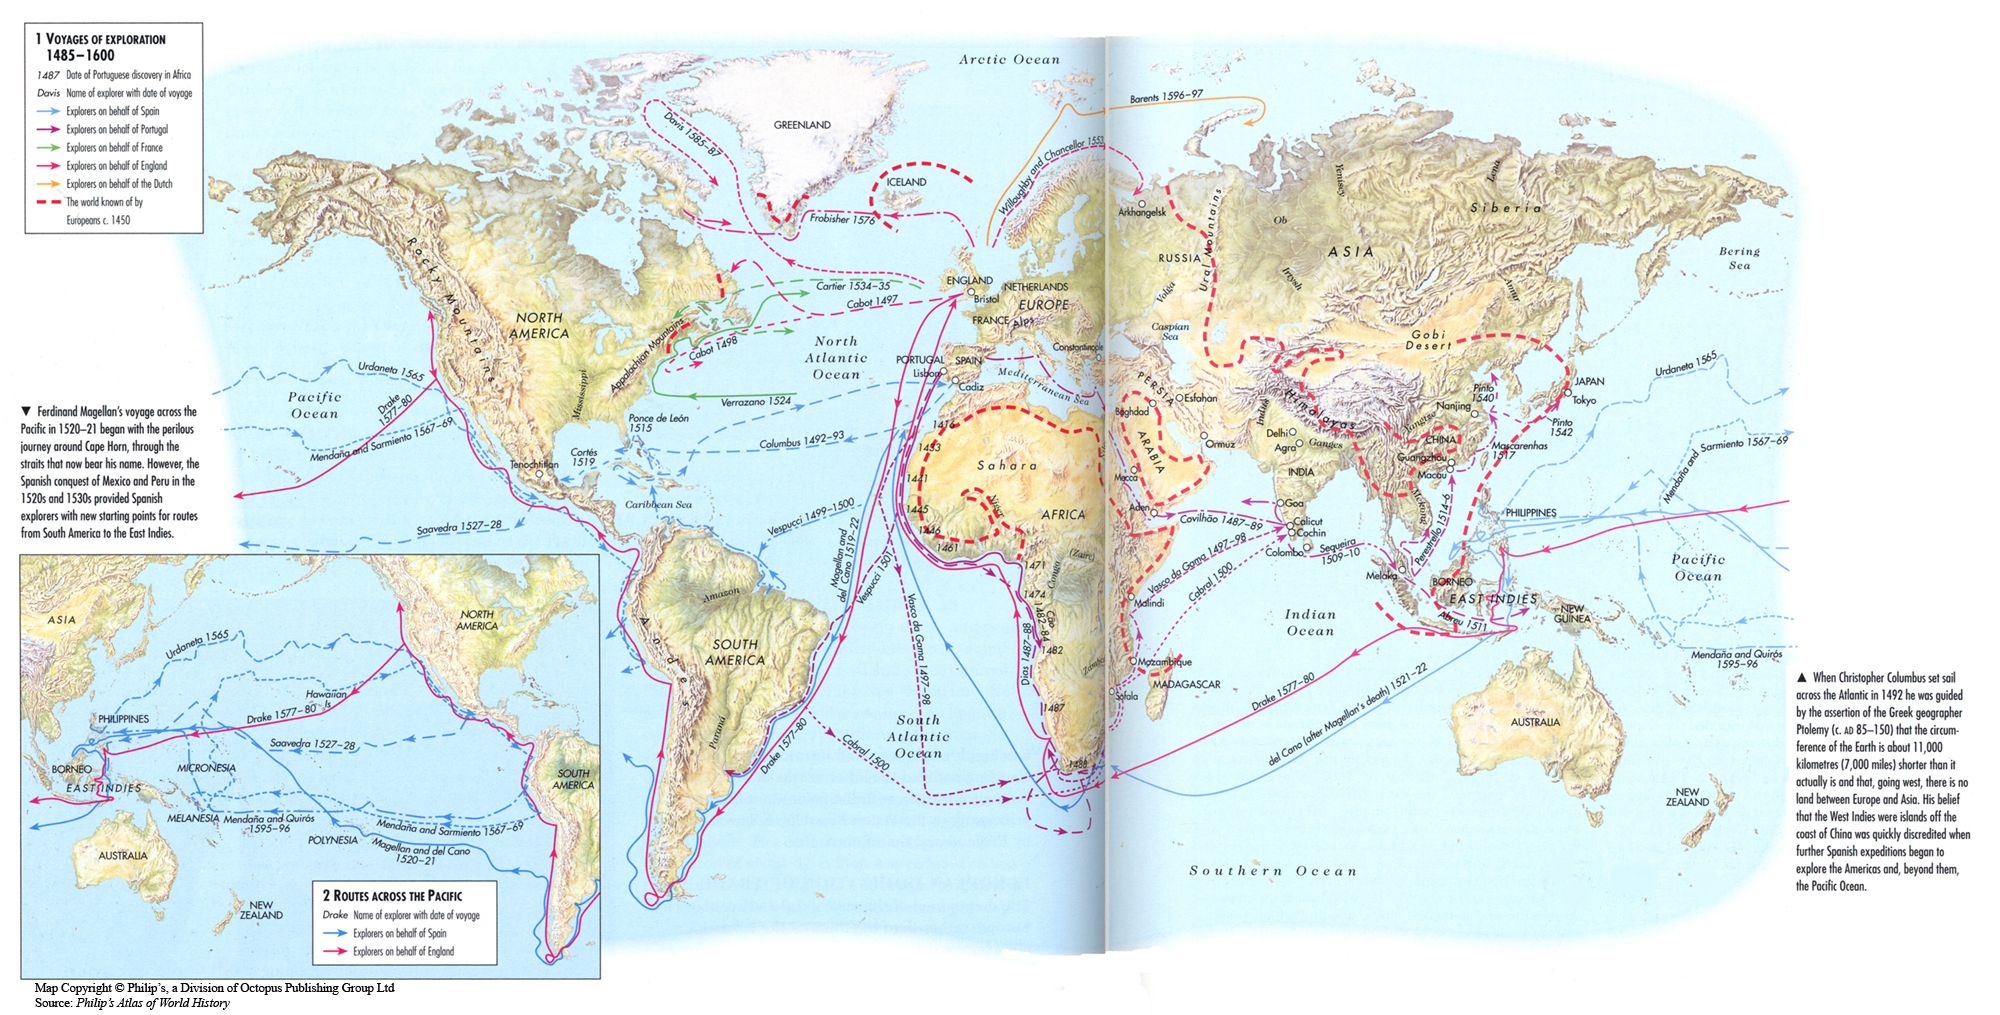 the european voyages of exploration